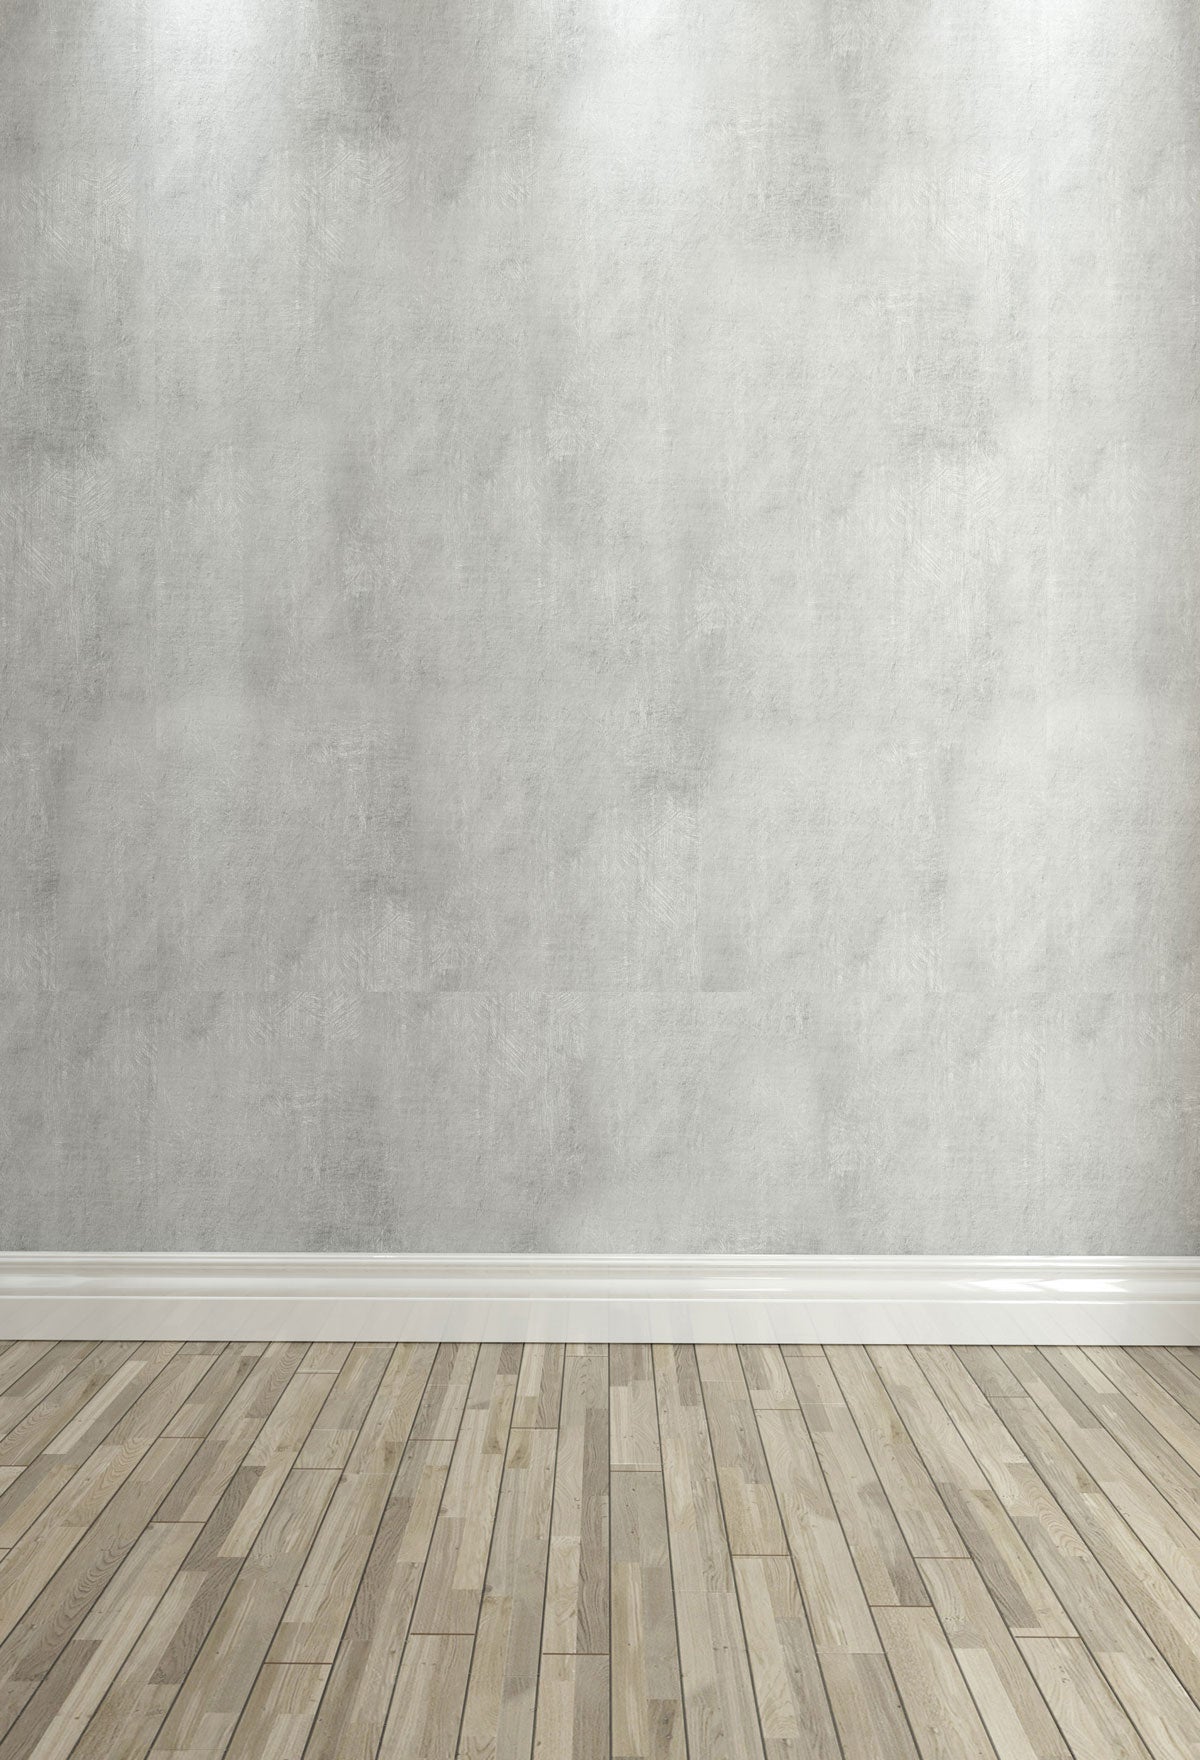 Kate Retro Gray Backdrop Wall Brown Floor for Photo